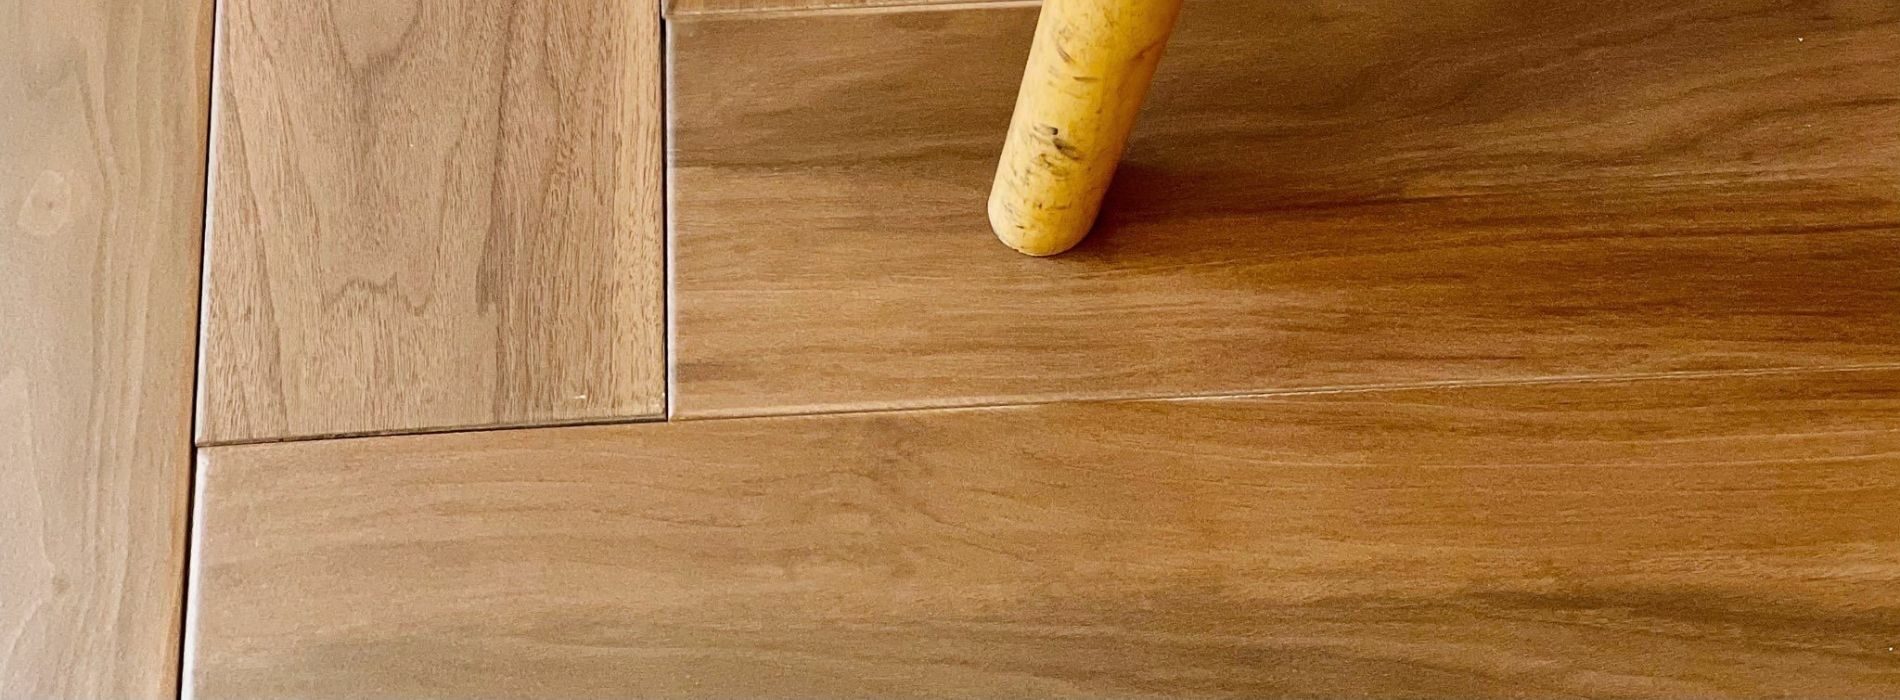 A close up of a wooden floor with a bat on it. 